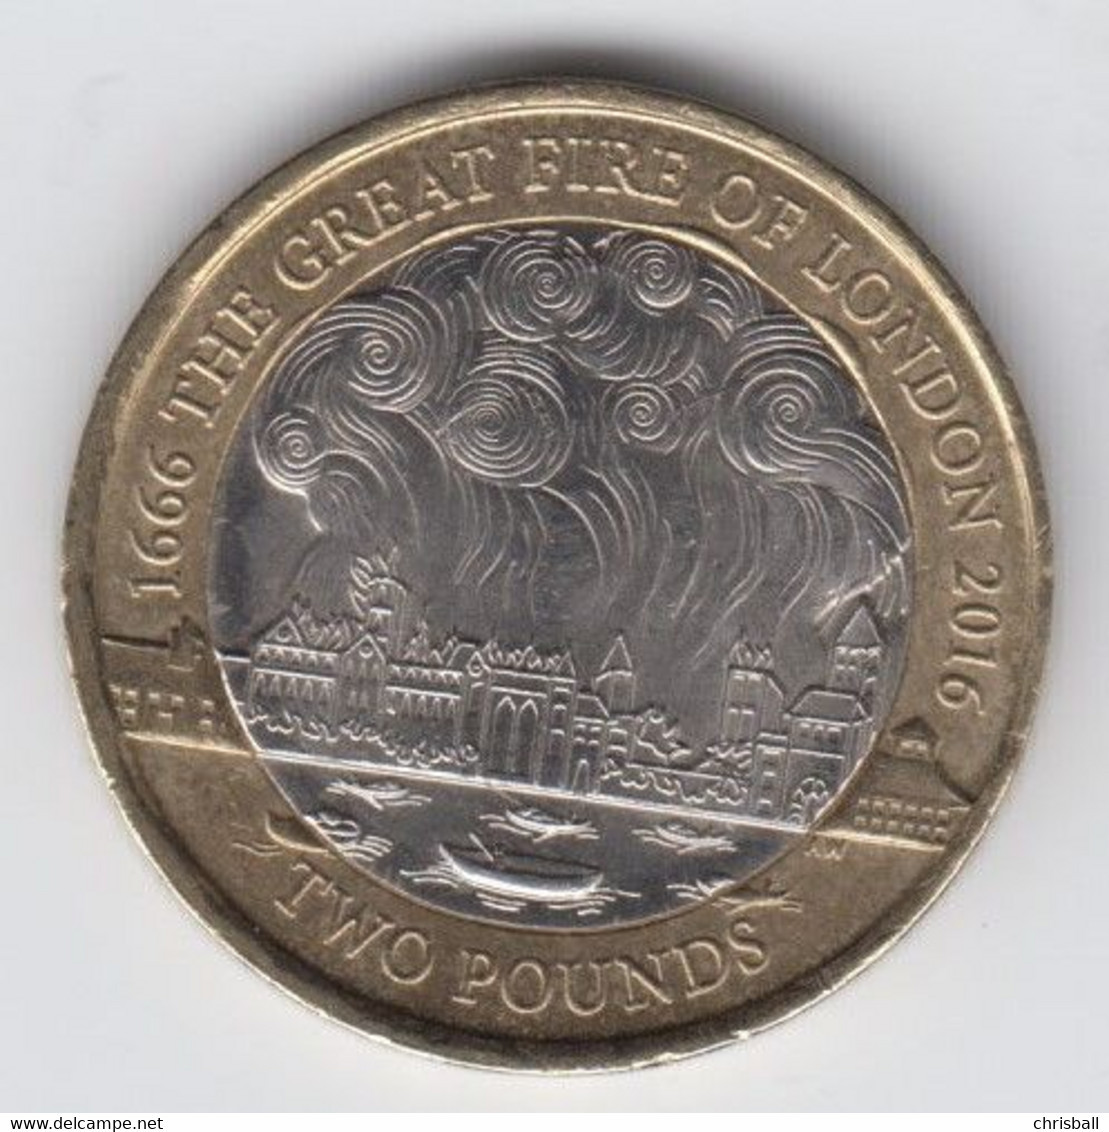 Great Britain UK £2 Two Pound Coin 2016 (Great Fire Of London) - Circulated - 2 Pounds